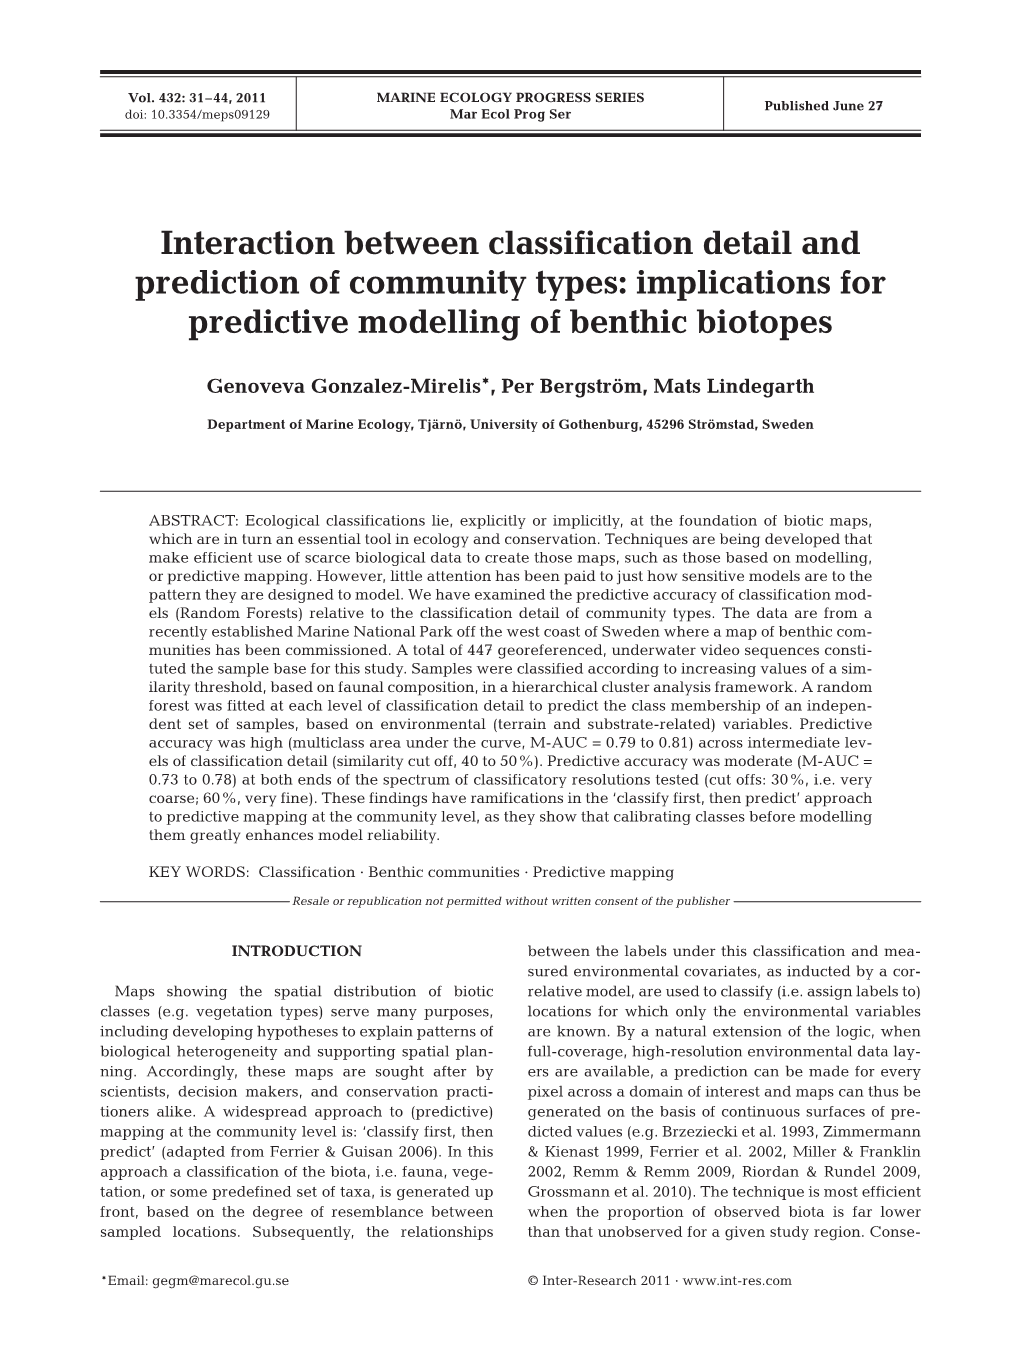 Interaction Between Classification Detail and Prediction of Community Types: Implications for Predictive Modelling of Benthic Biotopes